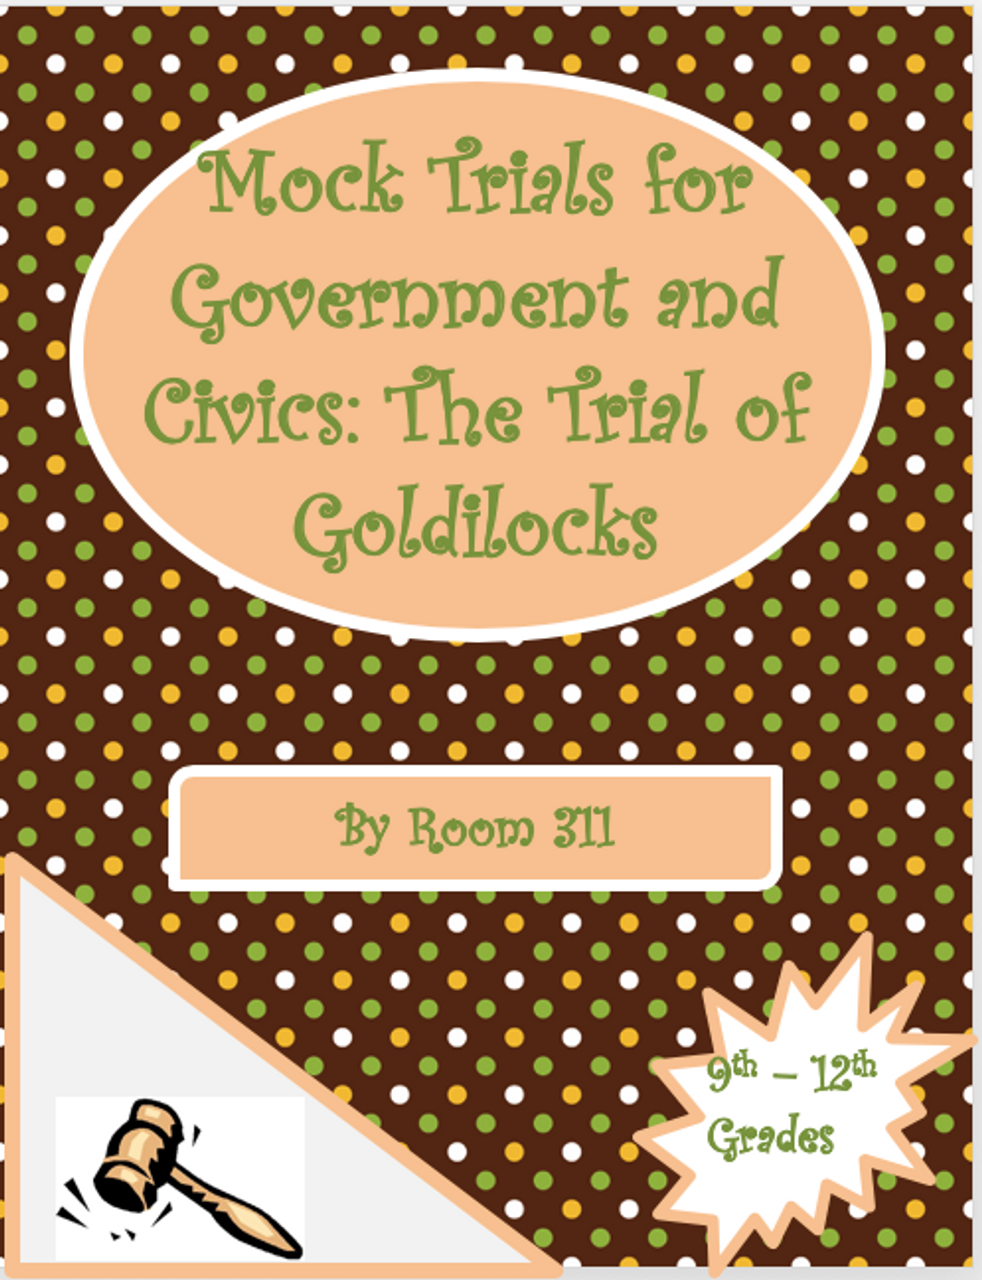 Mock Trials for Government and Civics: The Trial of Goldilocks